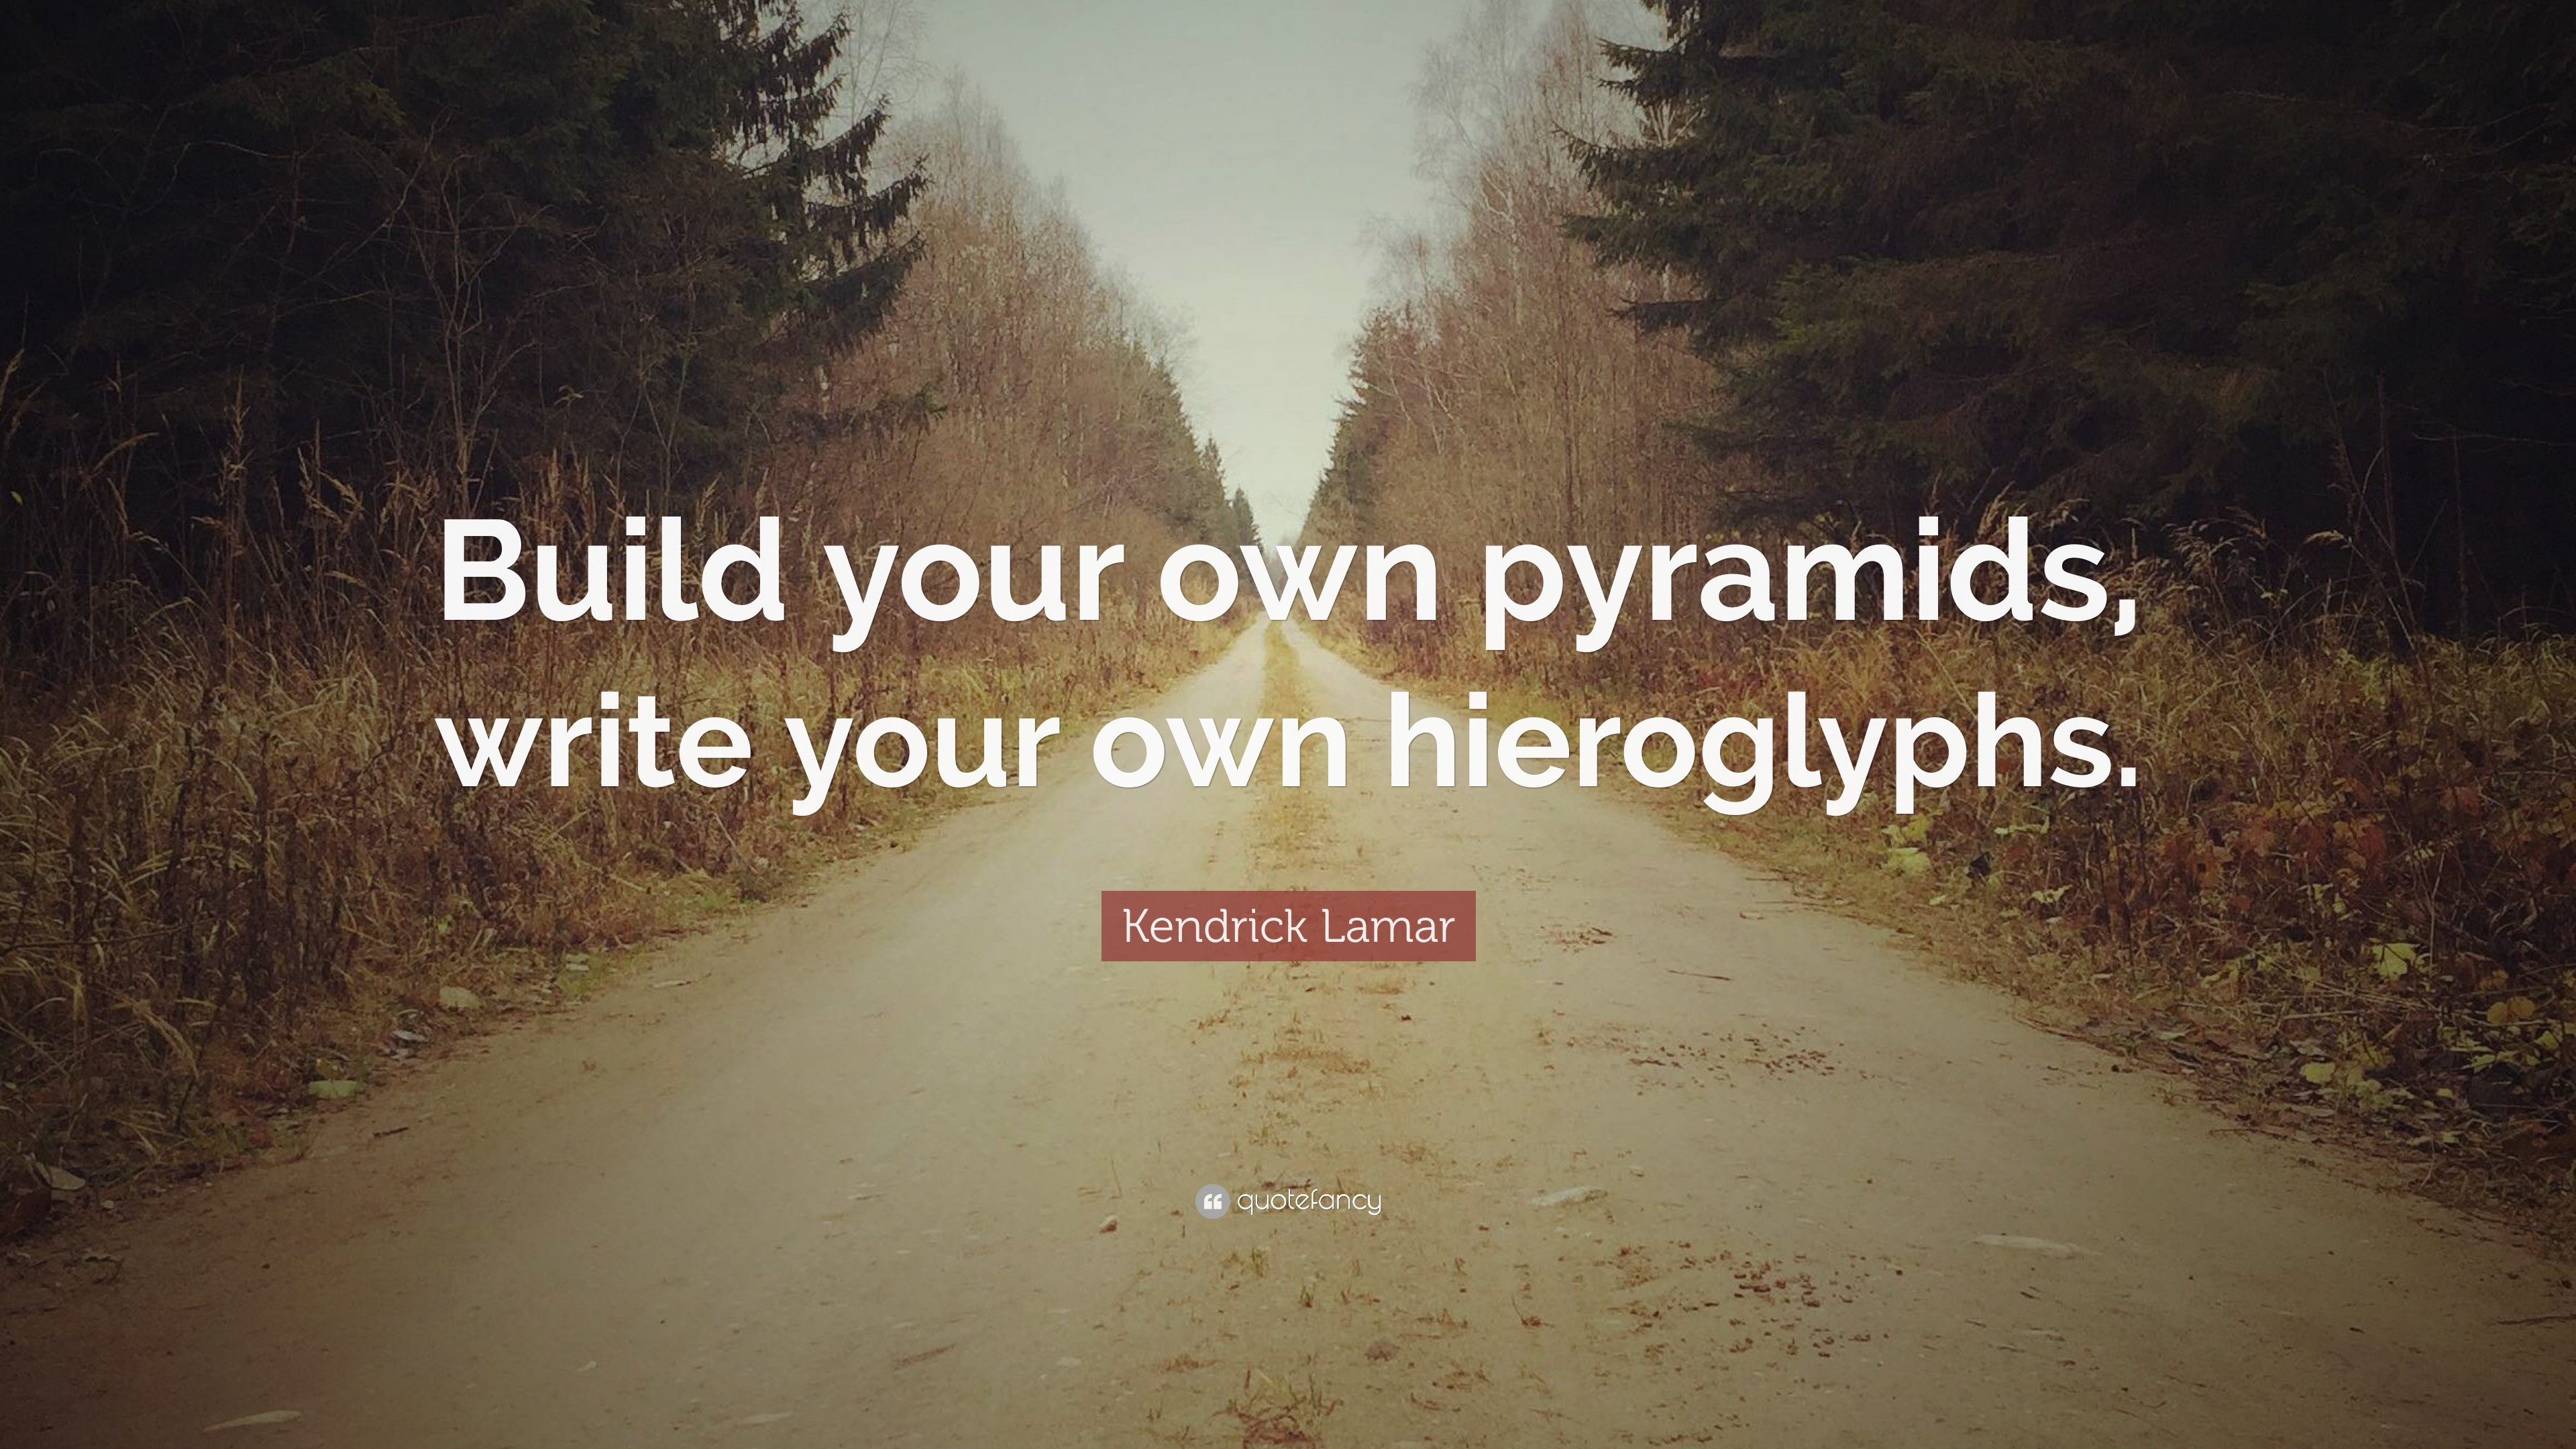 3840x2160 Kendrick Lamar Quote: “Build your own pyramids, write your own hieroglyphs.”